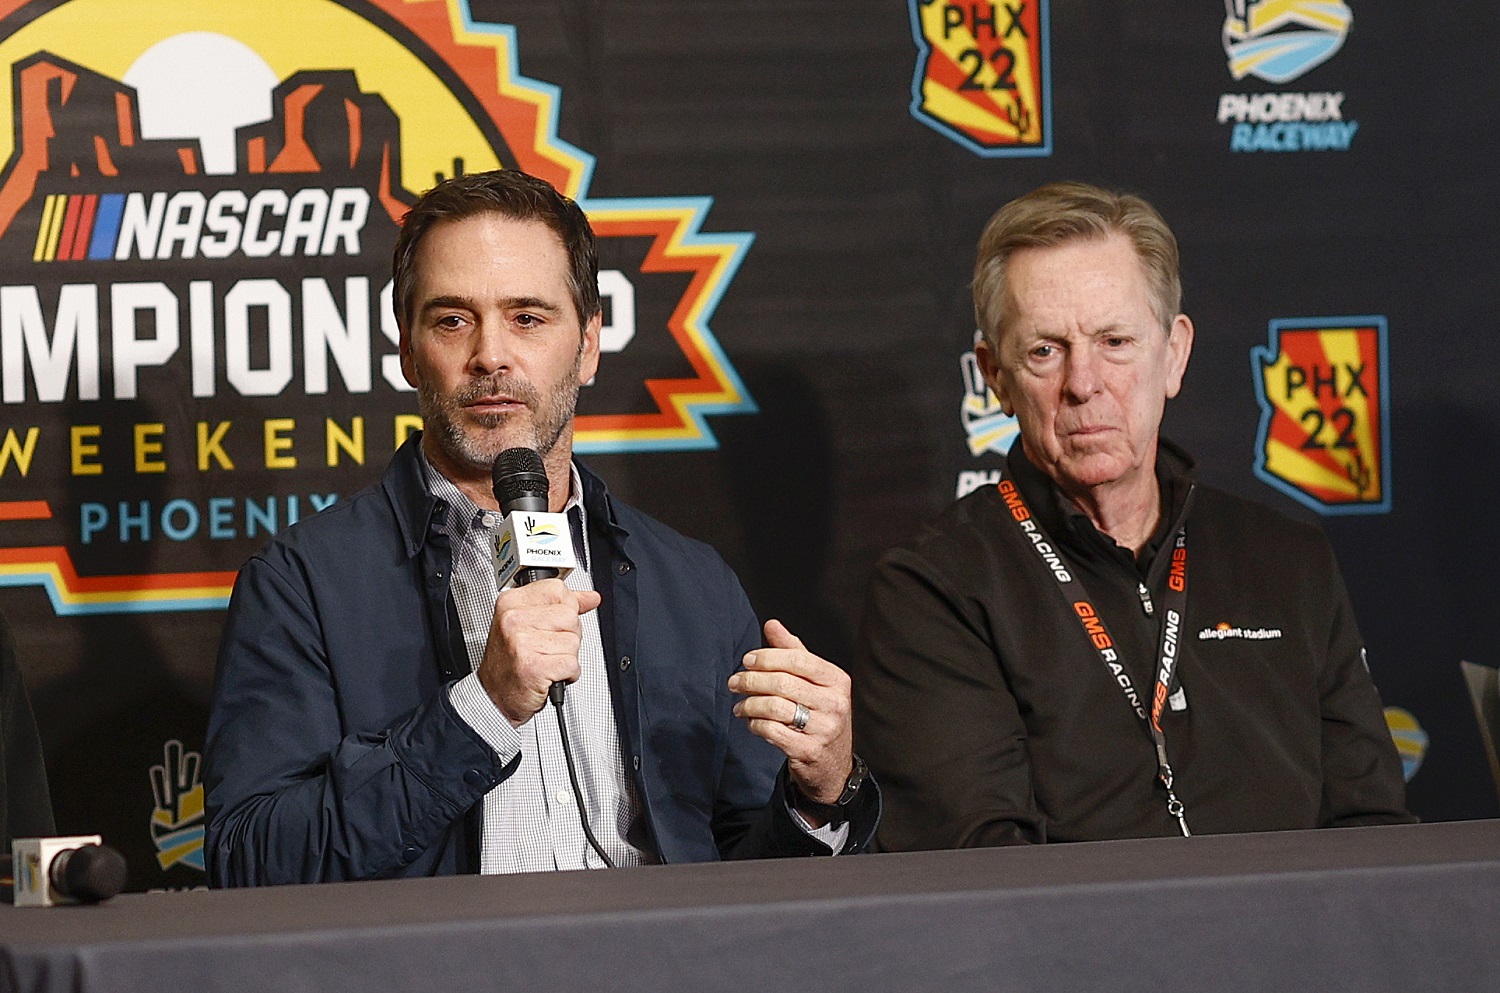 Former NASCAR driver Jimmie Johnson and Petty GMS co-owner Maury Gallagher are teaming up at Petty GMS in 2023.